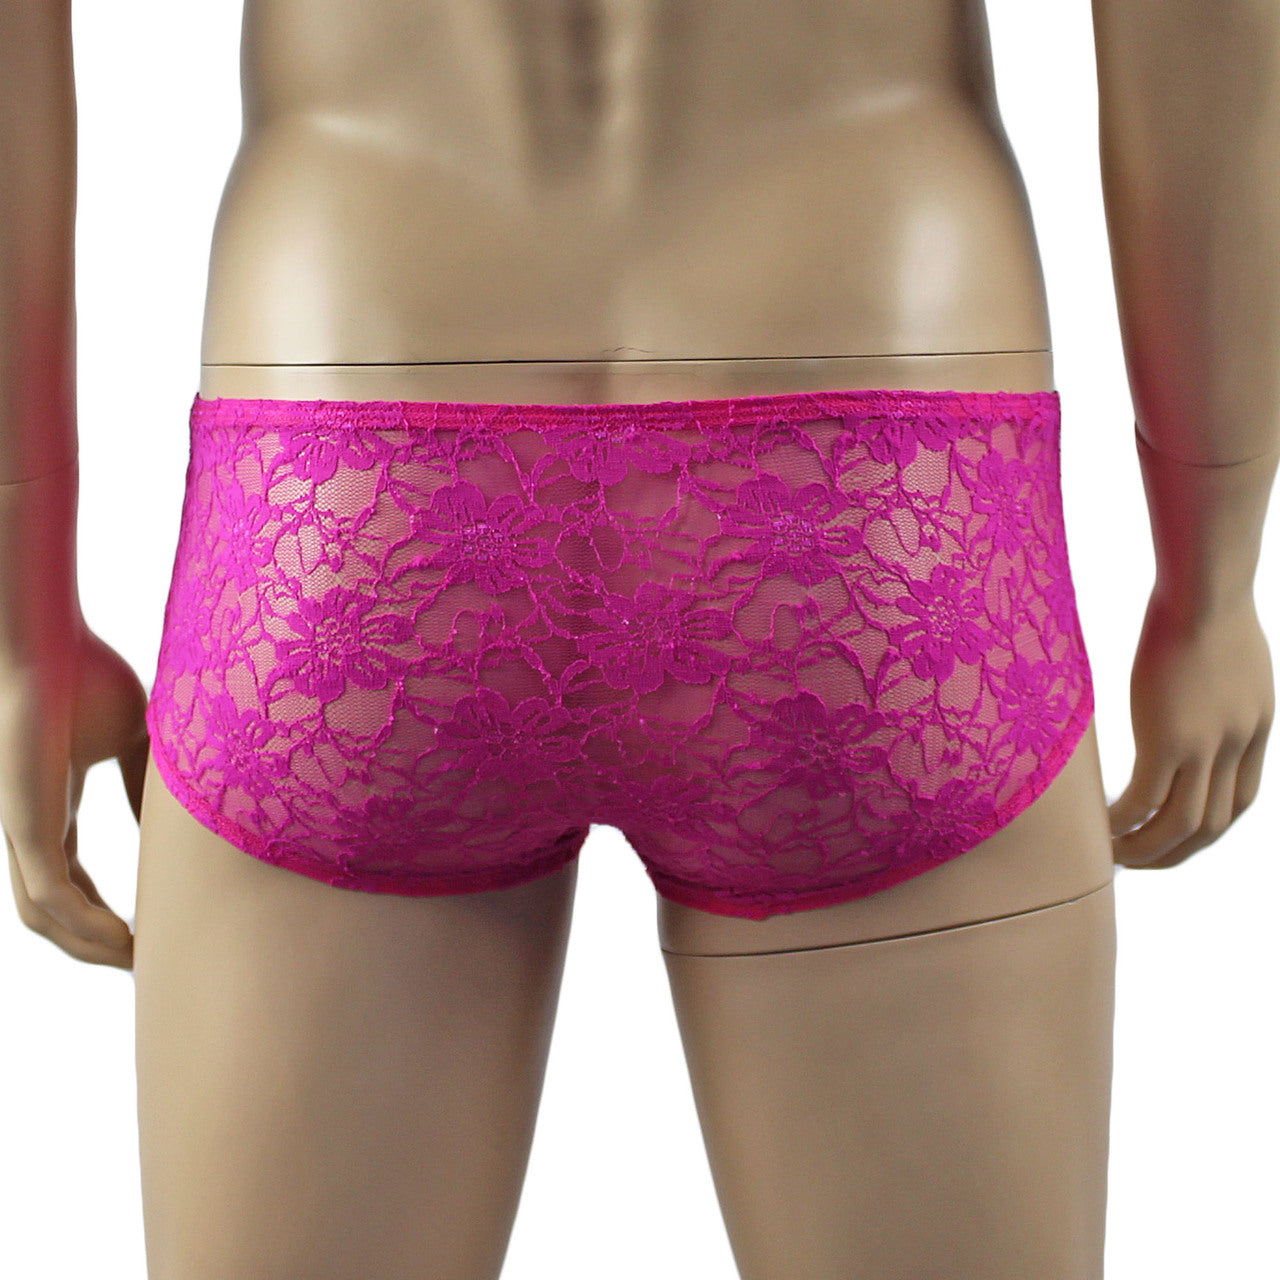 Mens Sexy Lingerie Stretch Lace  Male Panty Bikini Brief Neon Pink